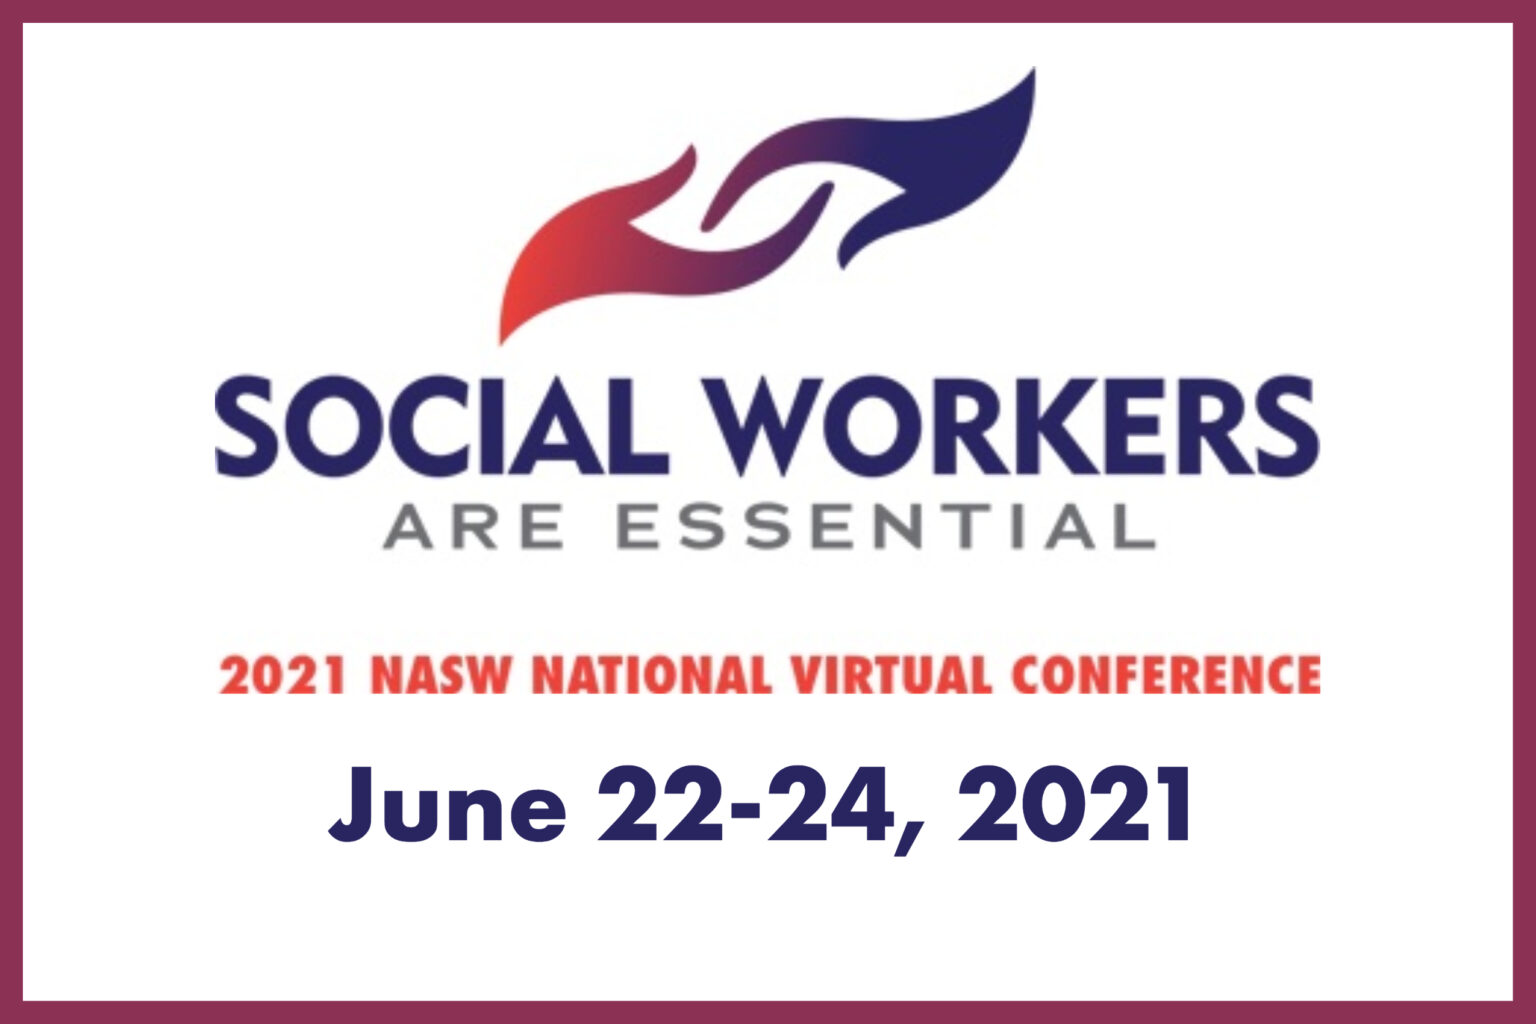 Attend NASW's 2021 National Virtual Conference From June 2224